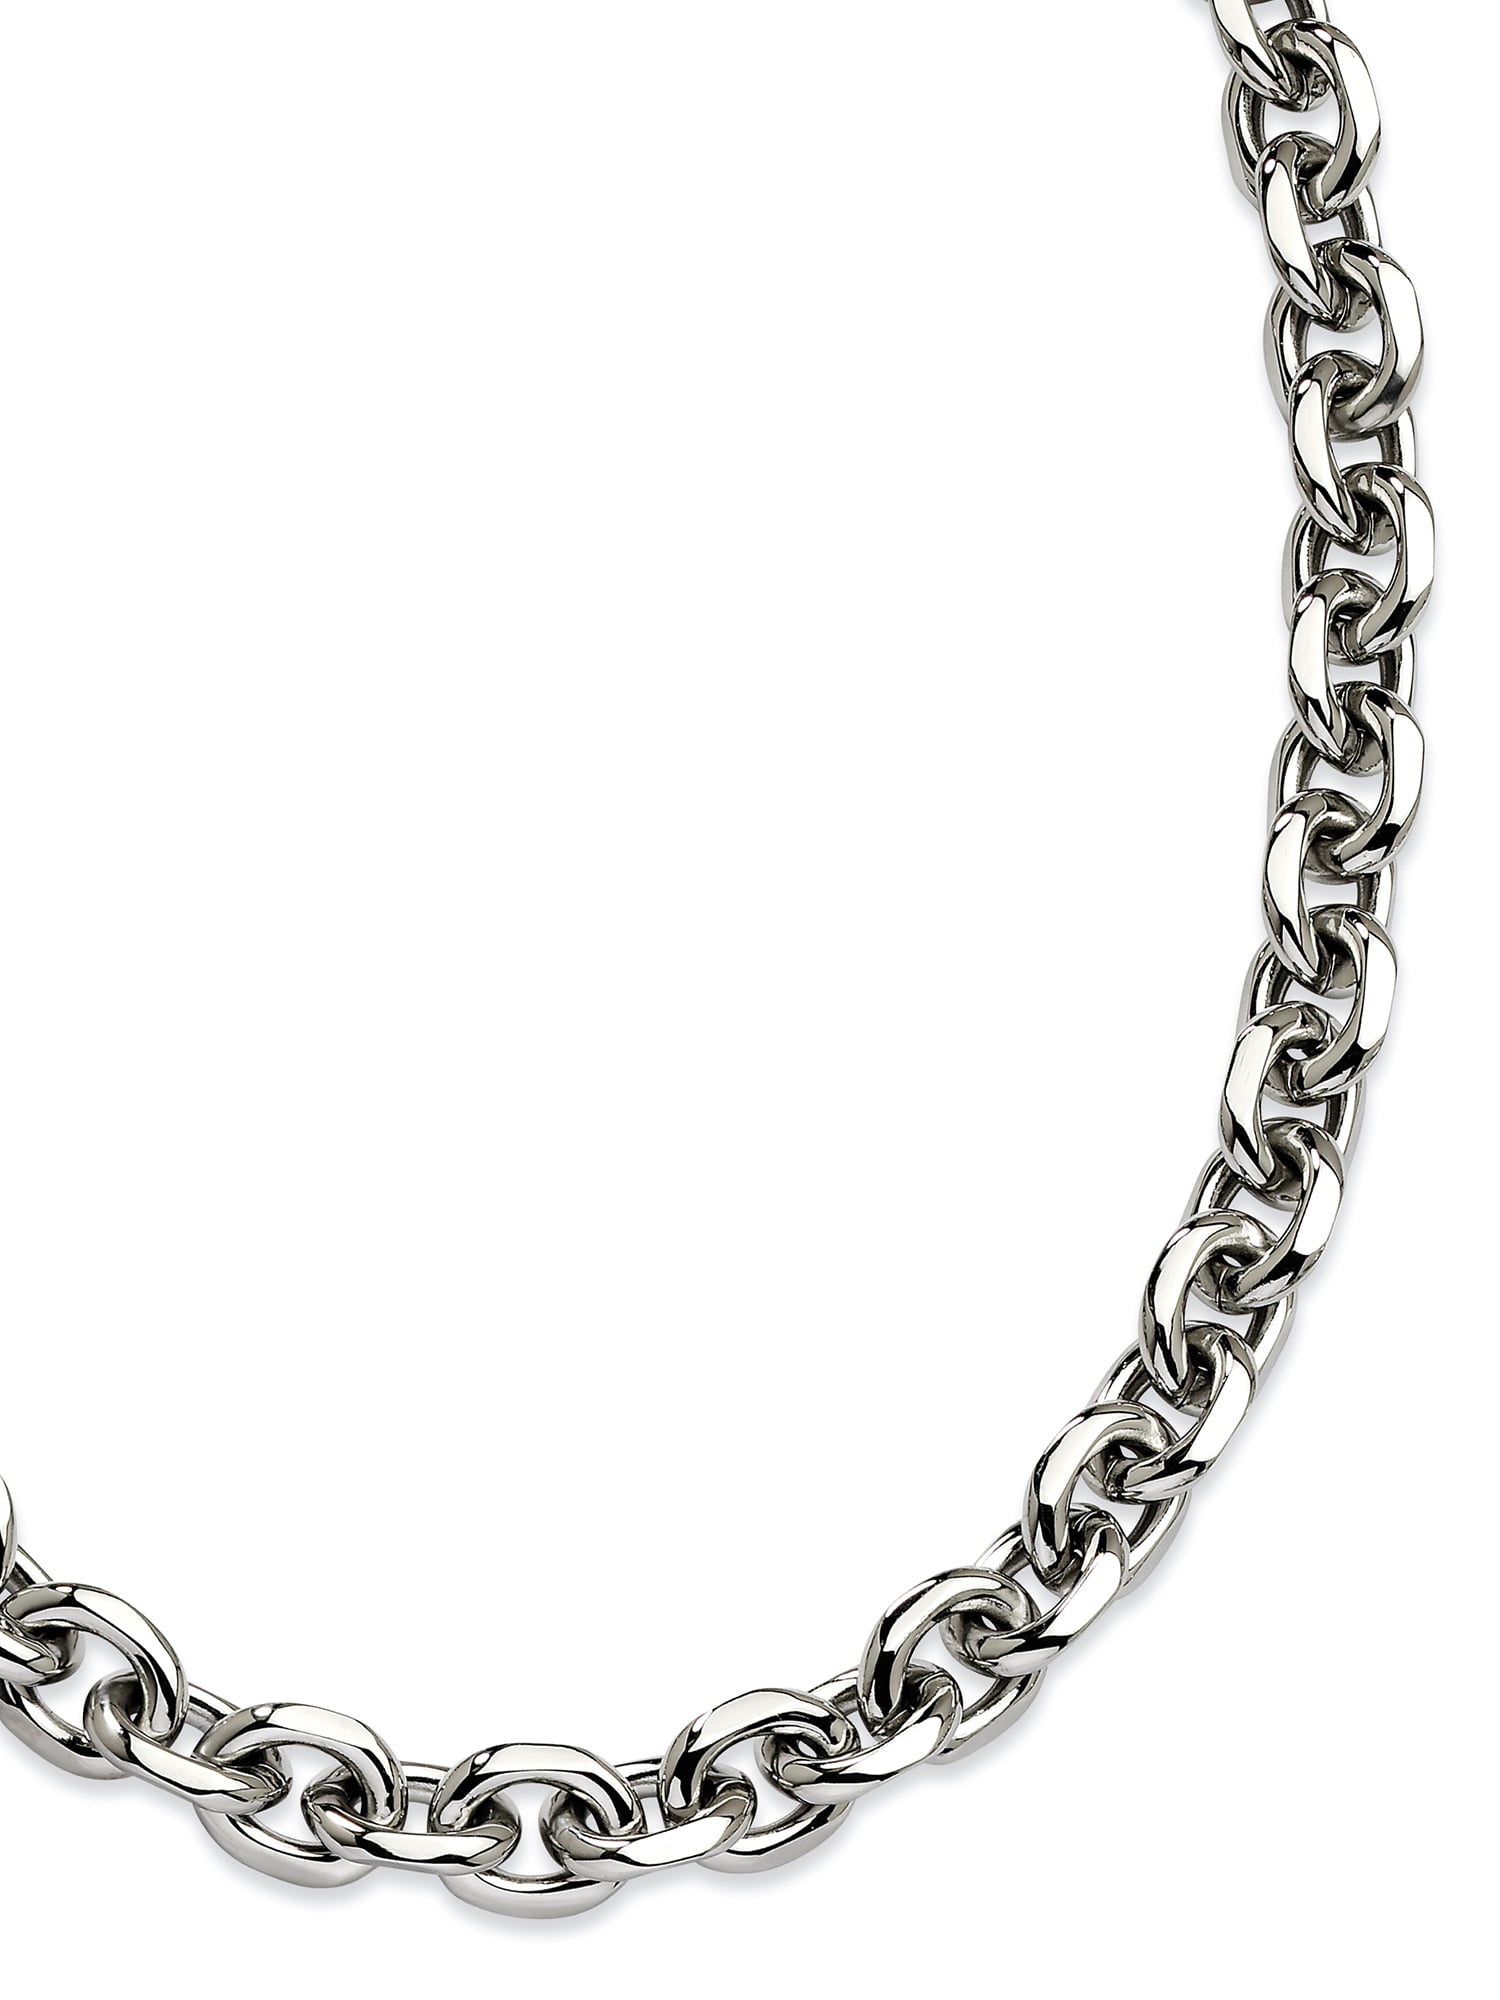 Jewelry Necklaces Chains Stainless Steel Polished 24.5in Necklace 